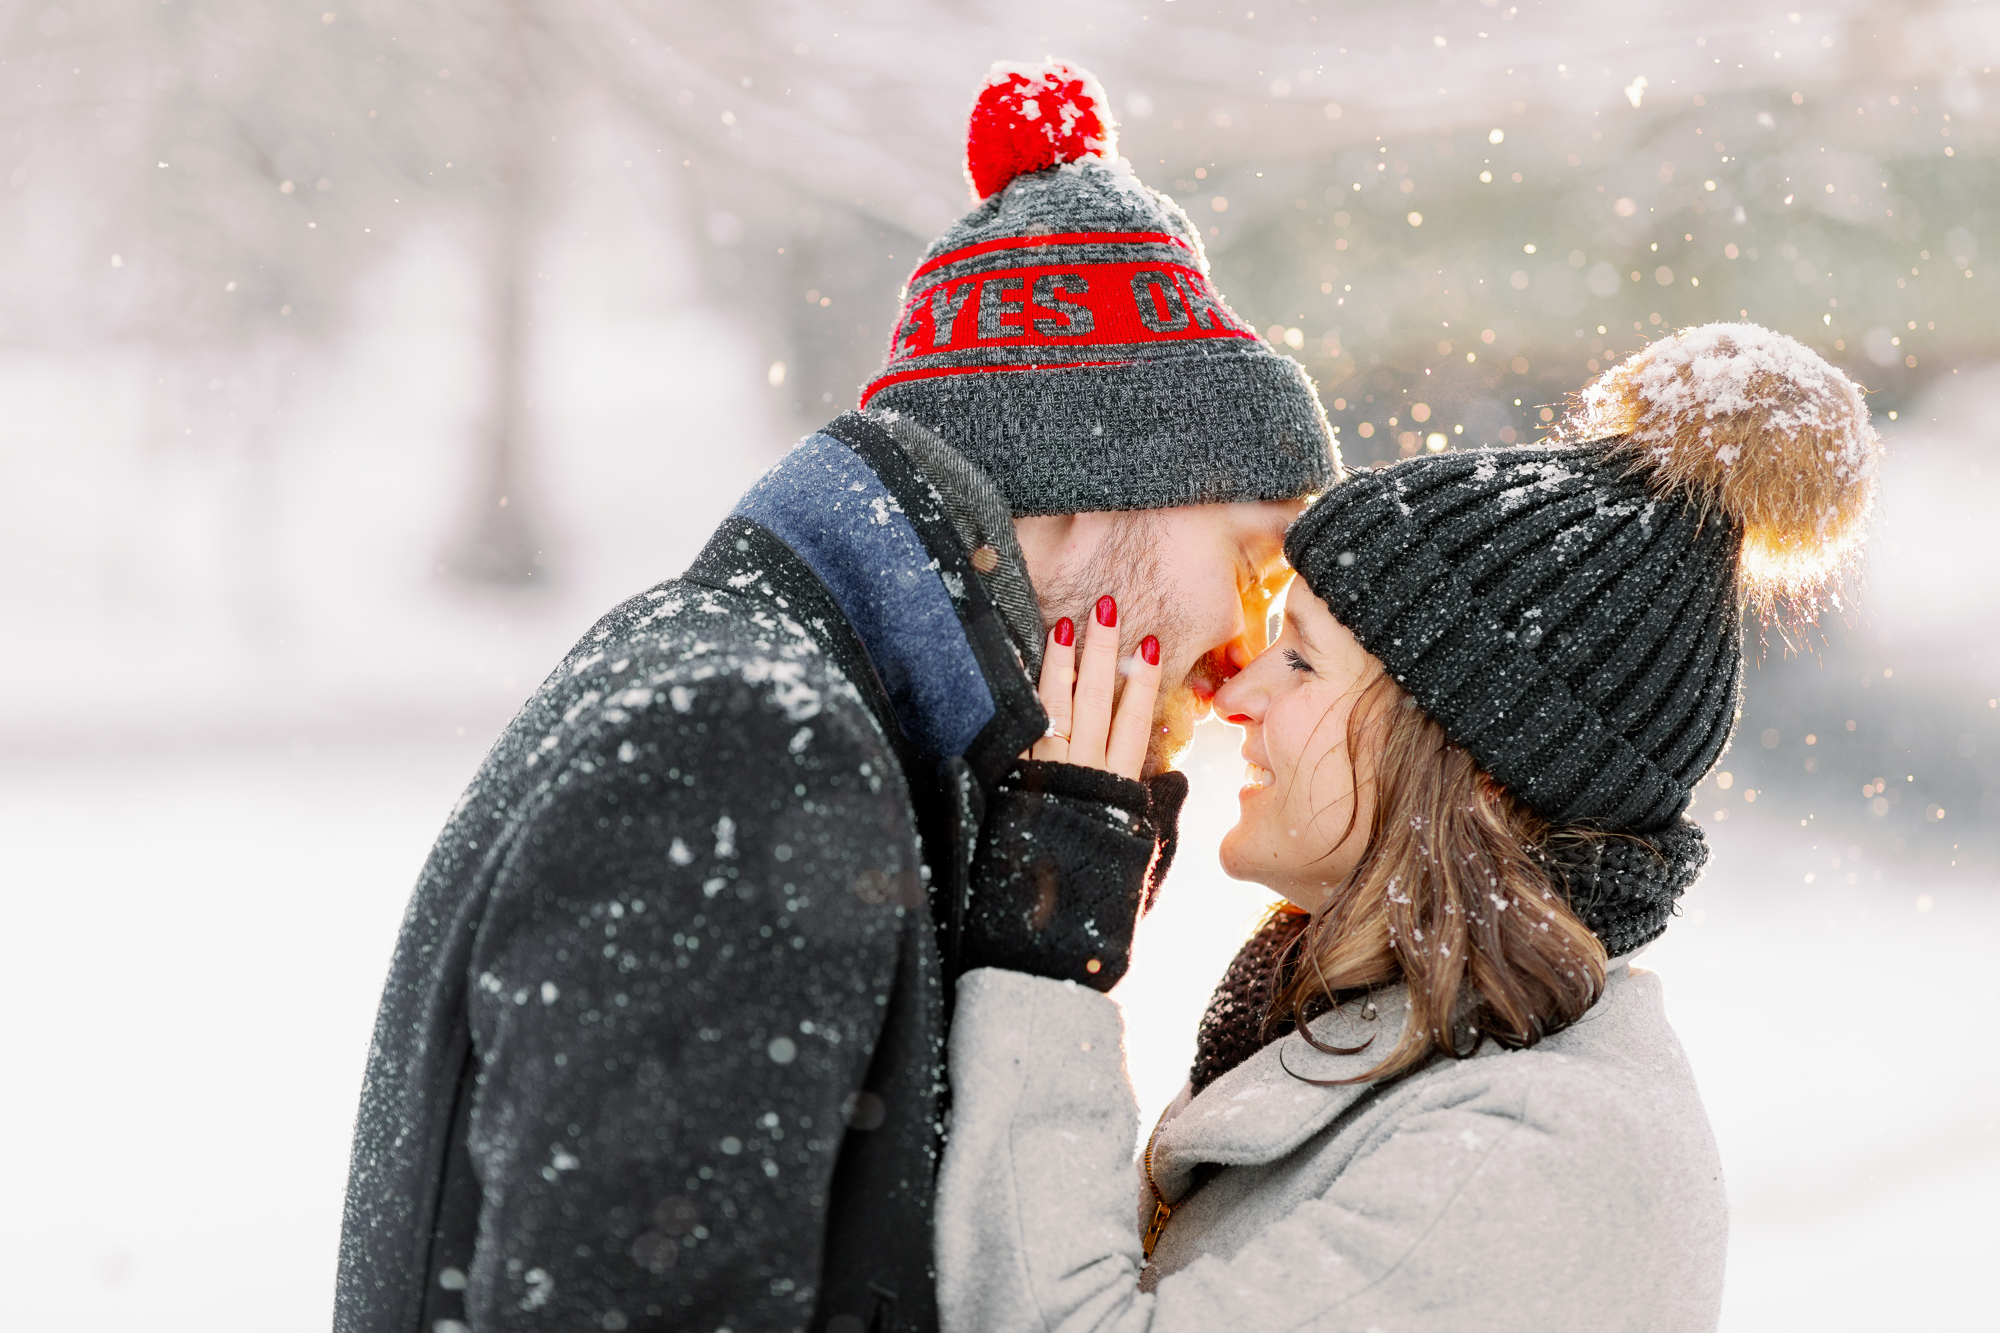 Romantic and Snowy Engagement Photos in Prospect Park